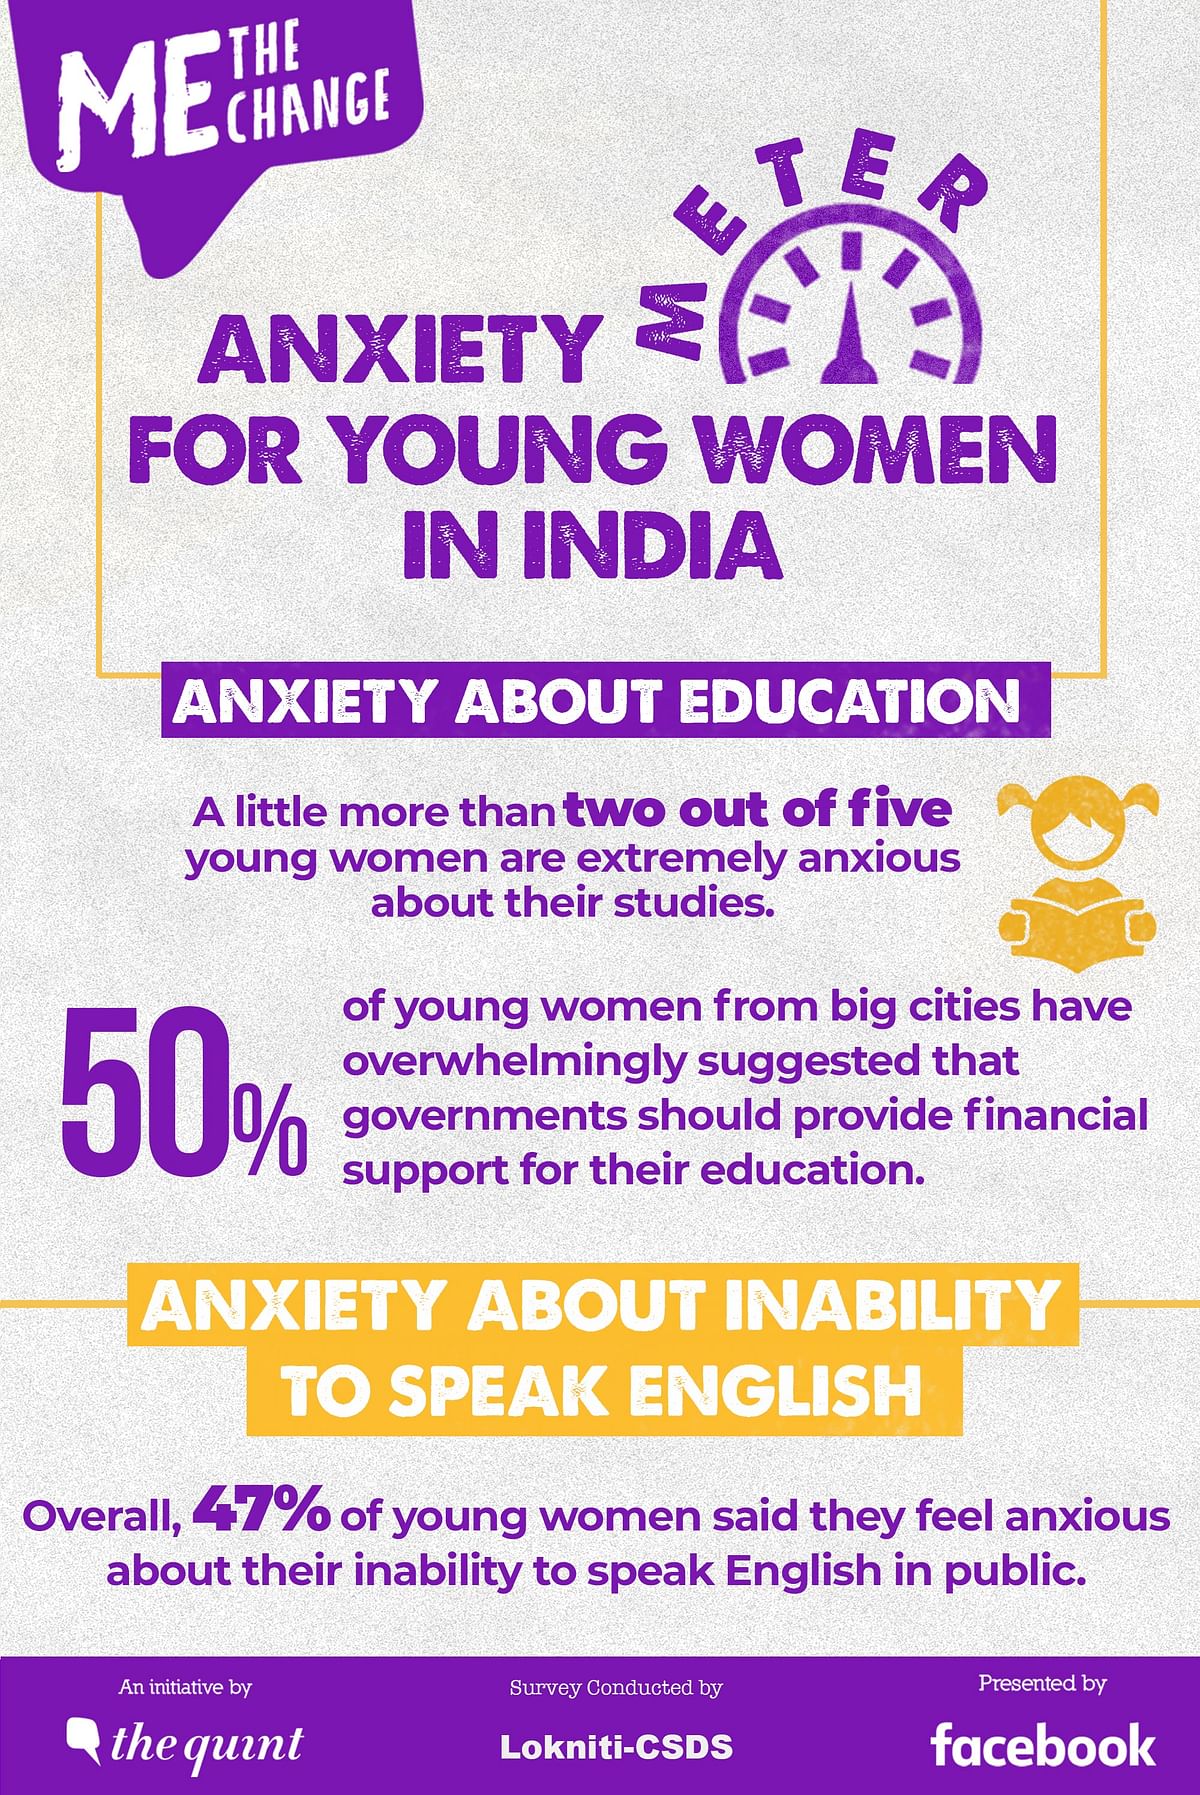 Nearly 1/3 first-time women voters in India suffer from mental tension or depression, a survey found. 